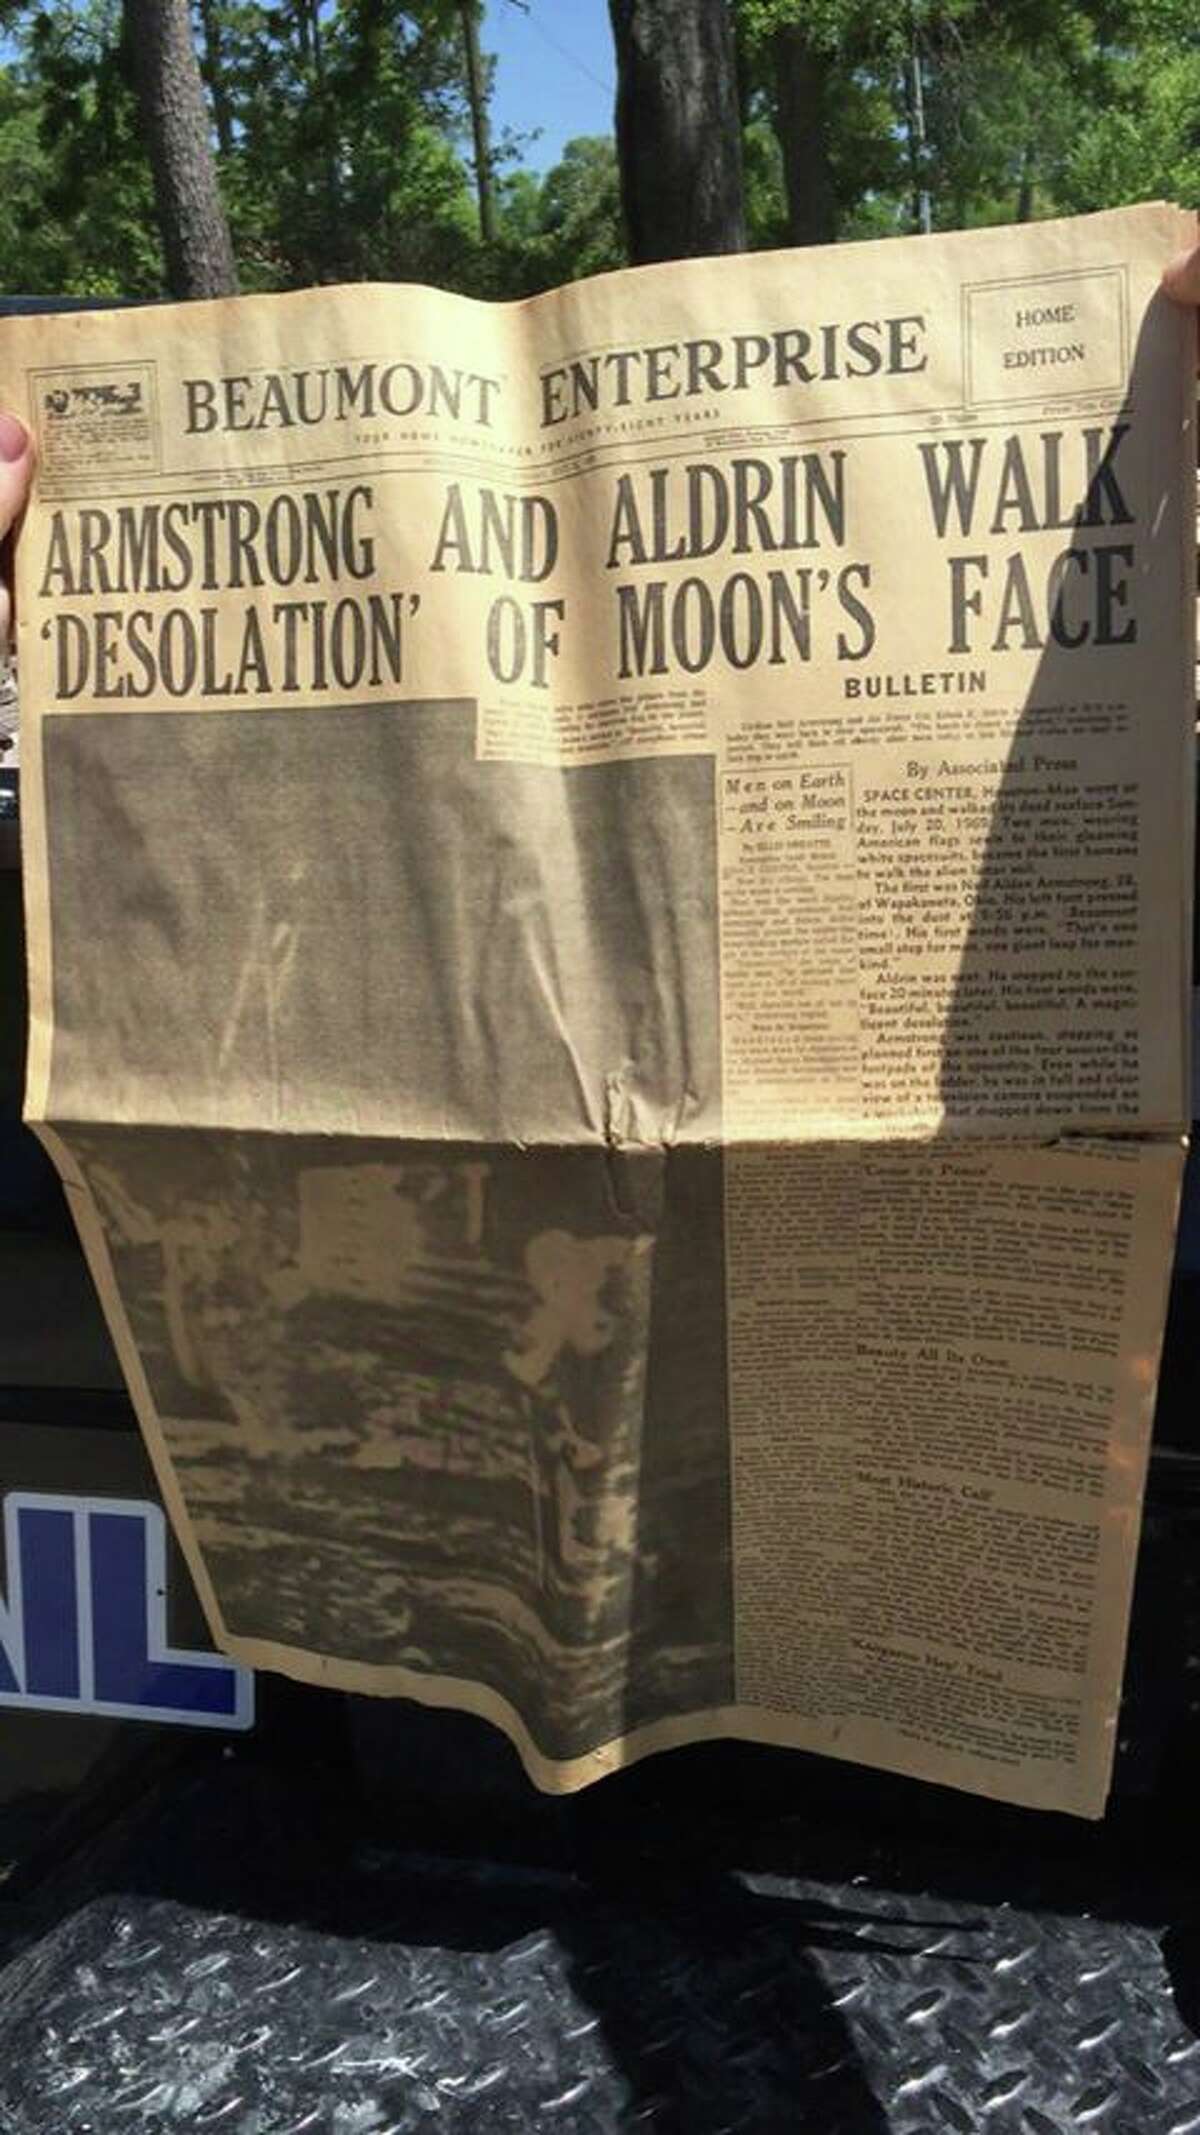 Dustyn Myatt, of Kirbyville, holds up a copy of the Beaumont Enterprise, dated July 21, 1969, reporting the news of astronauts Neil Armstrong and Edwin "Buzz" Aldrin's landing and walking on the moon. The headline read, "Armstrong and Aldwin walk 'desolation' of moon's face." Myatt, a demolition contractor, discovered the newspaper in a stash while working on a home Wednesday in Vidor. (Dustyn Myatt/Special to The Enterprise)